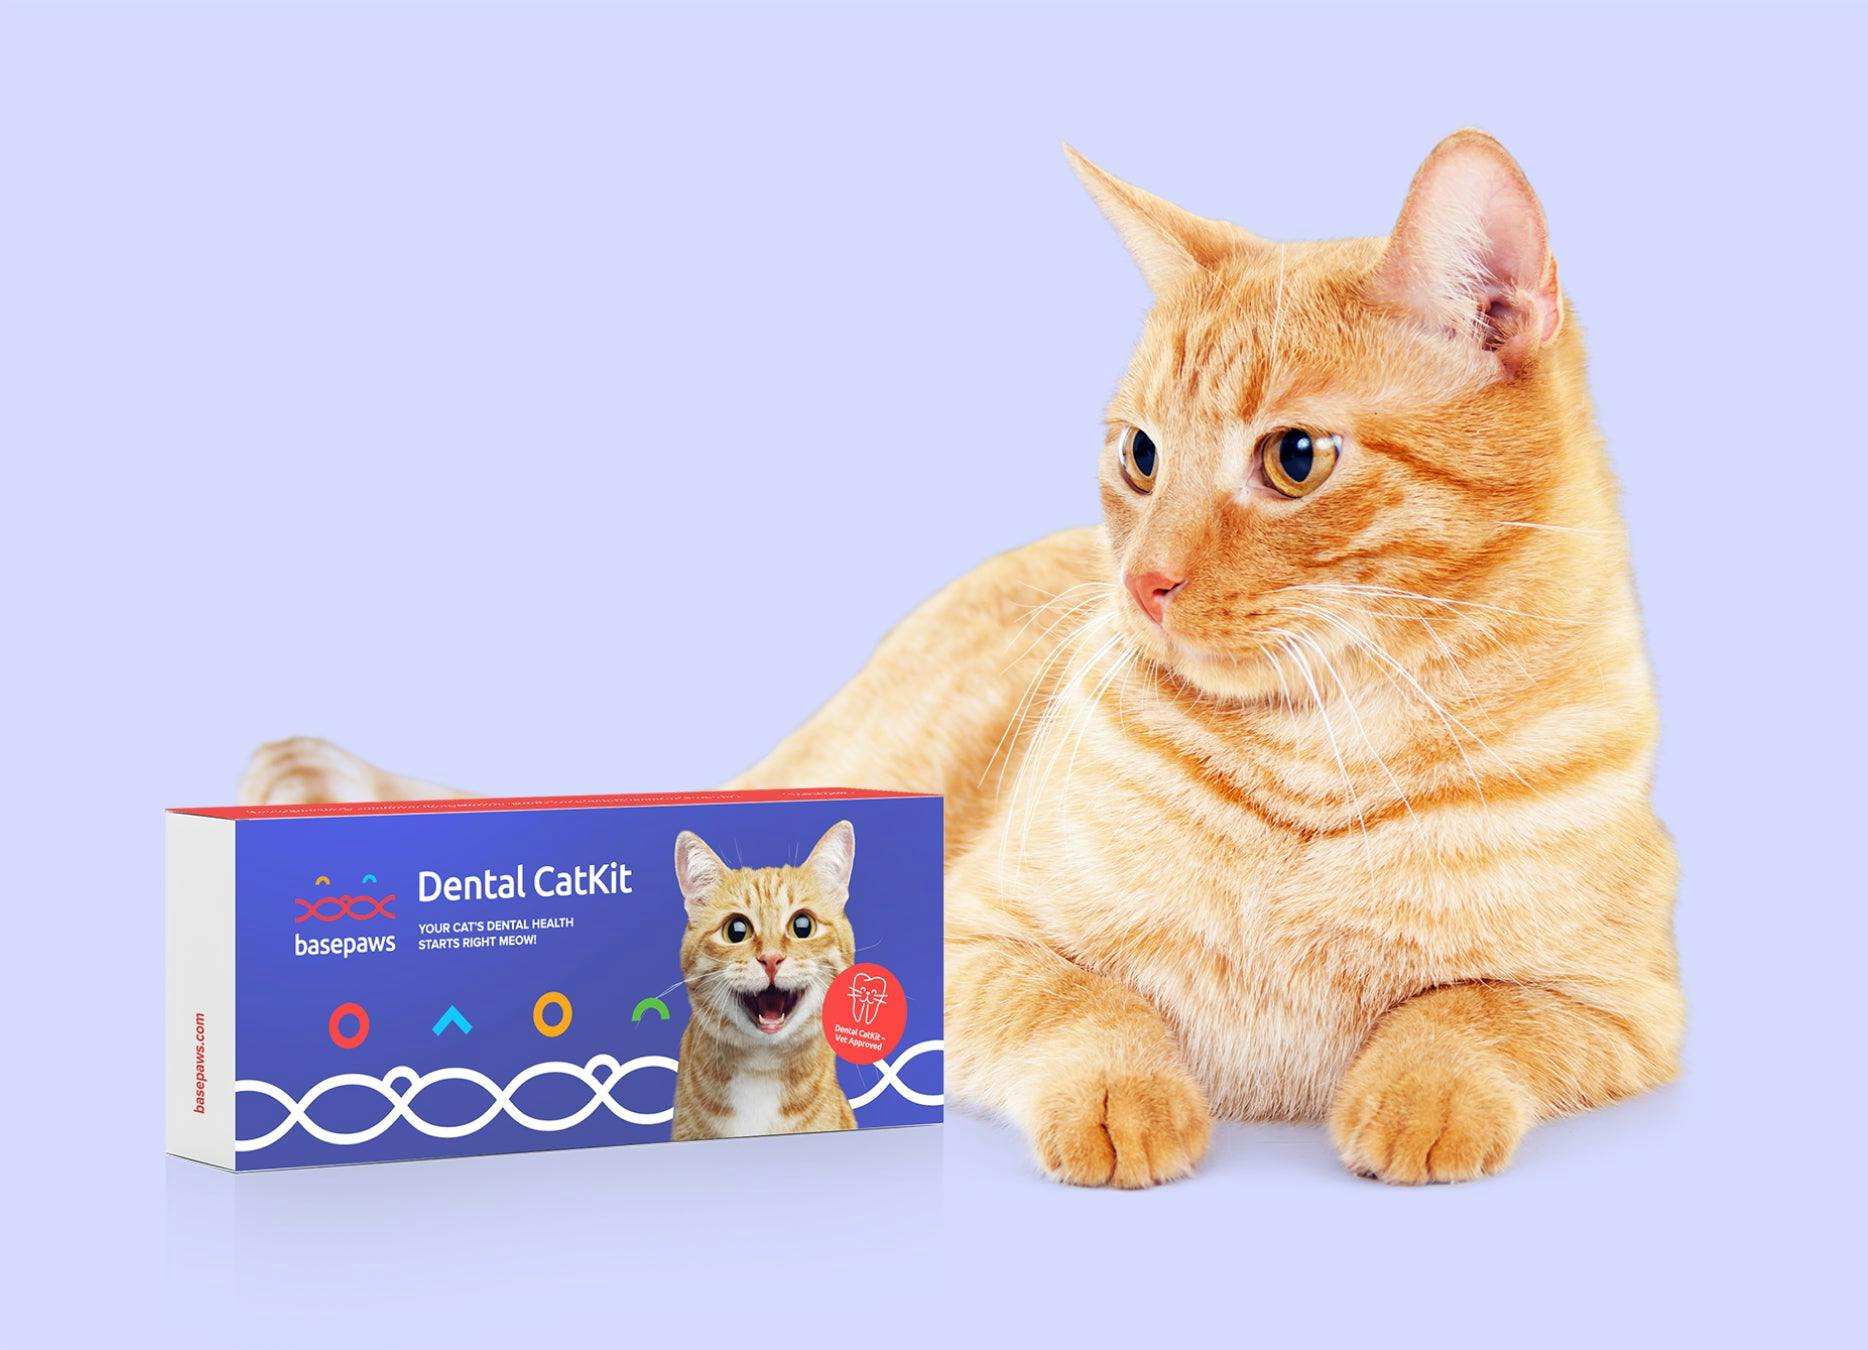 Introducing Basepaws Cat Dental Health Test: The best new way to keep your cat's teeth healthy.